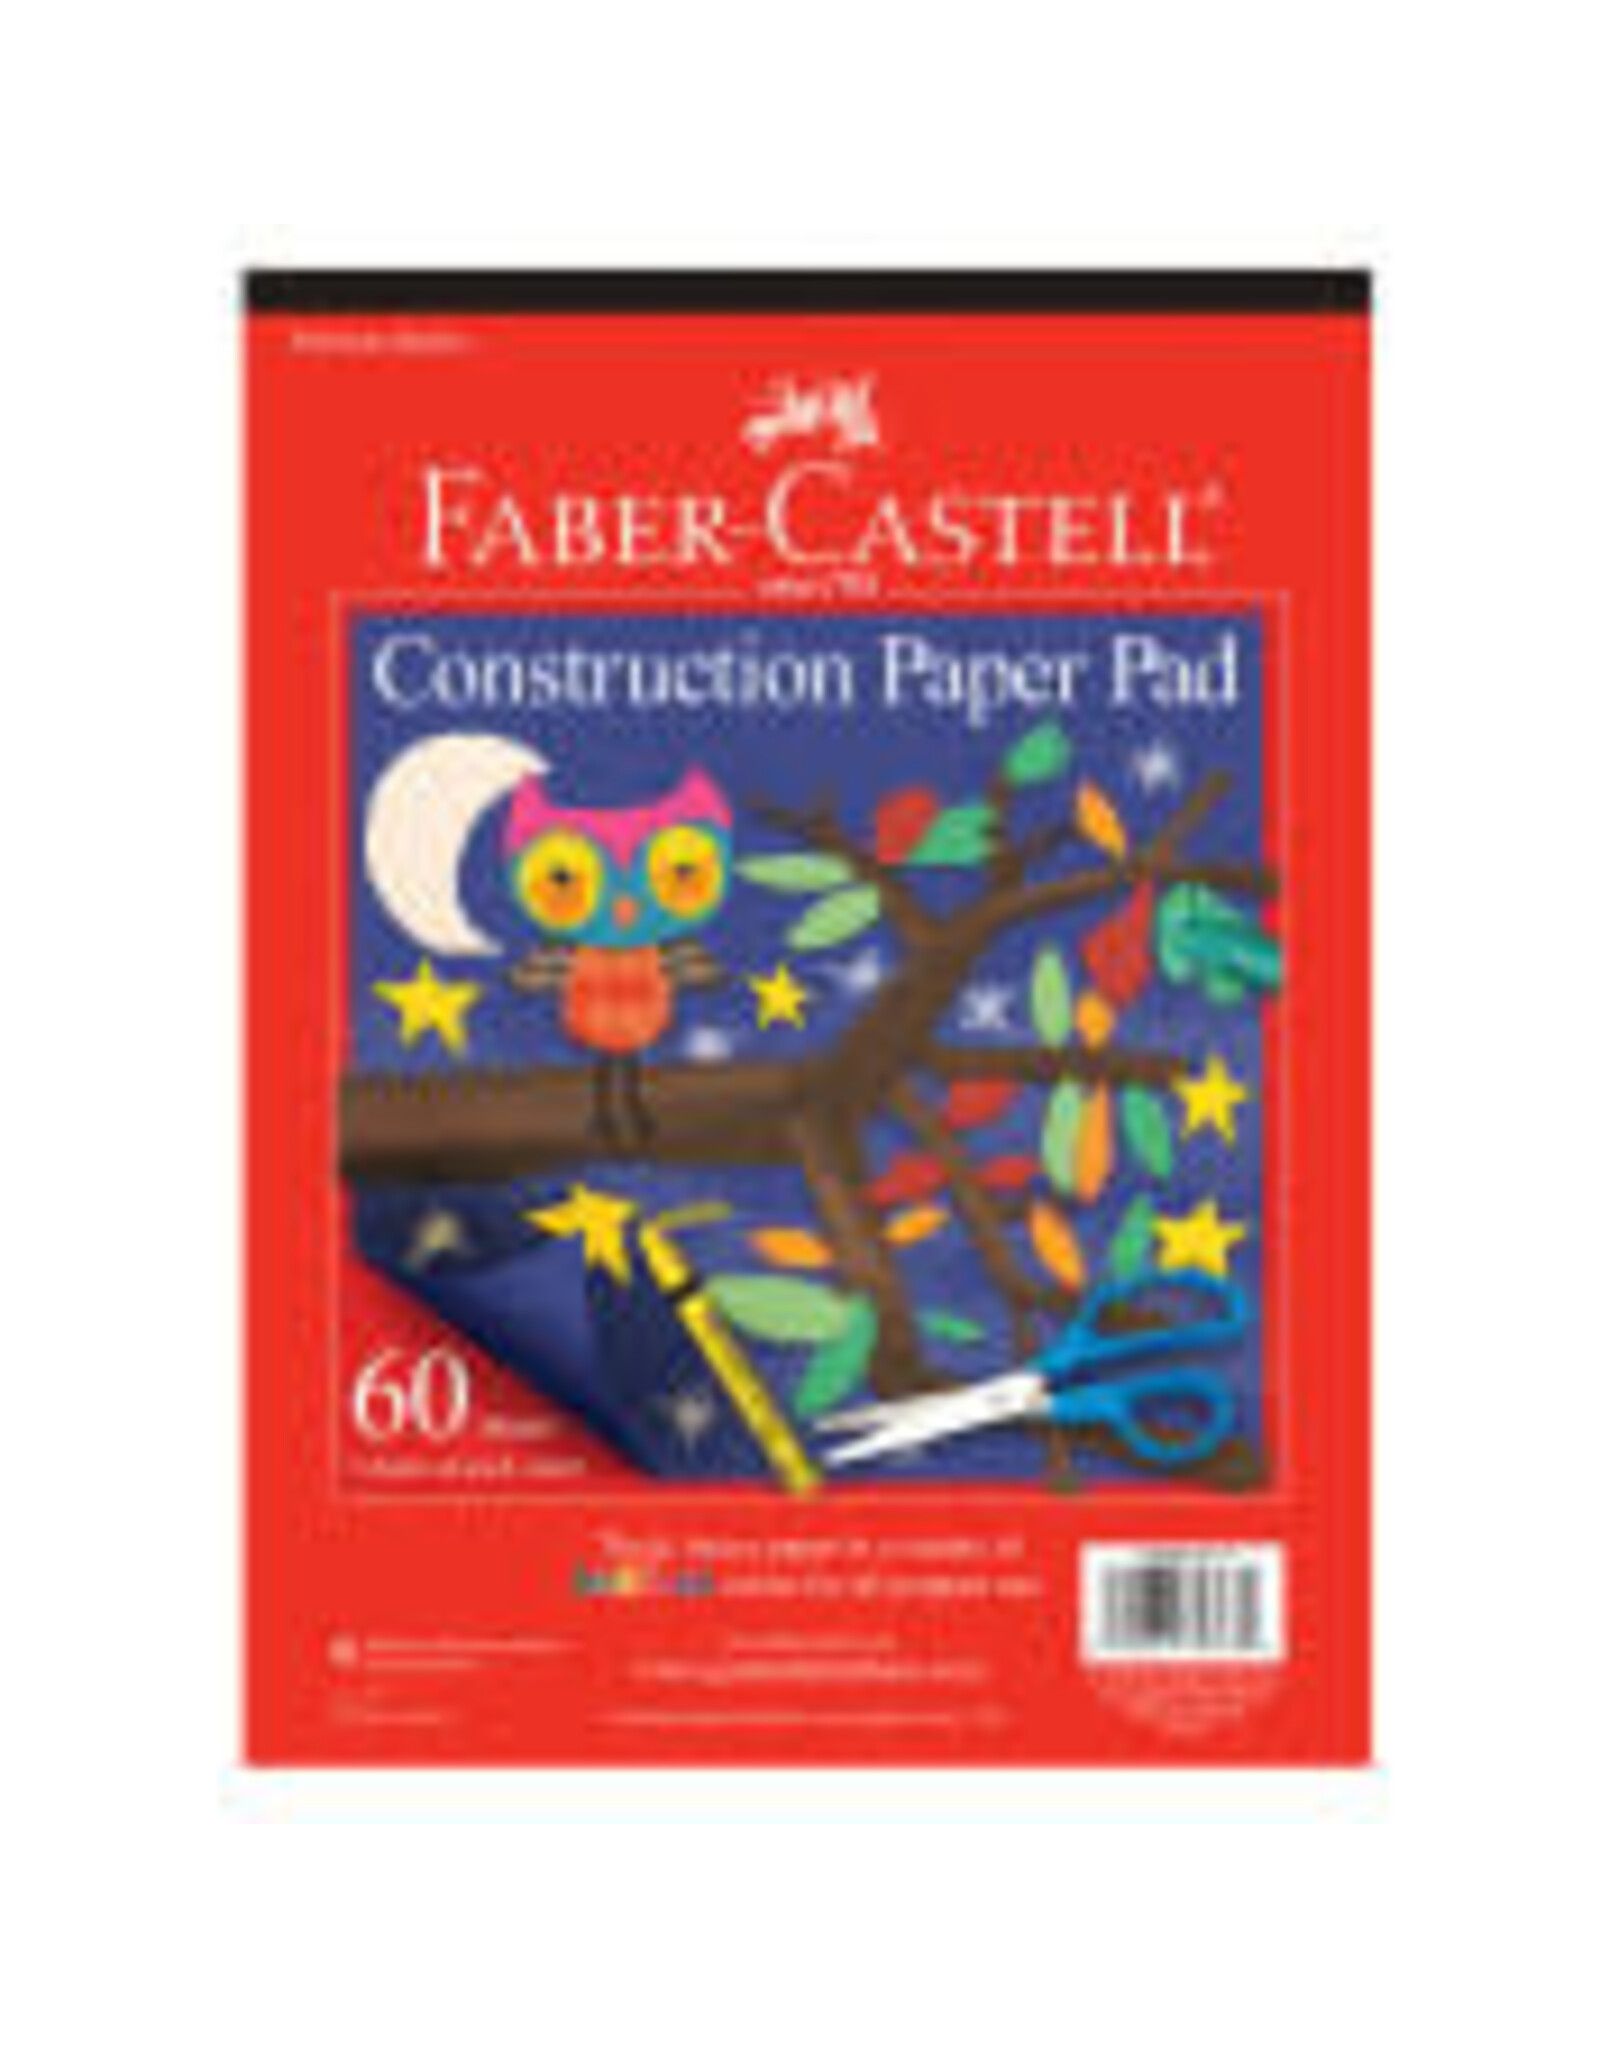 Faber-Castell Construction Paper Pad 9"x12"